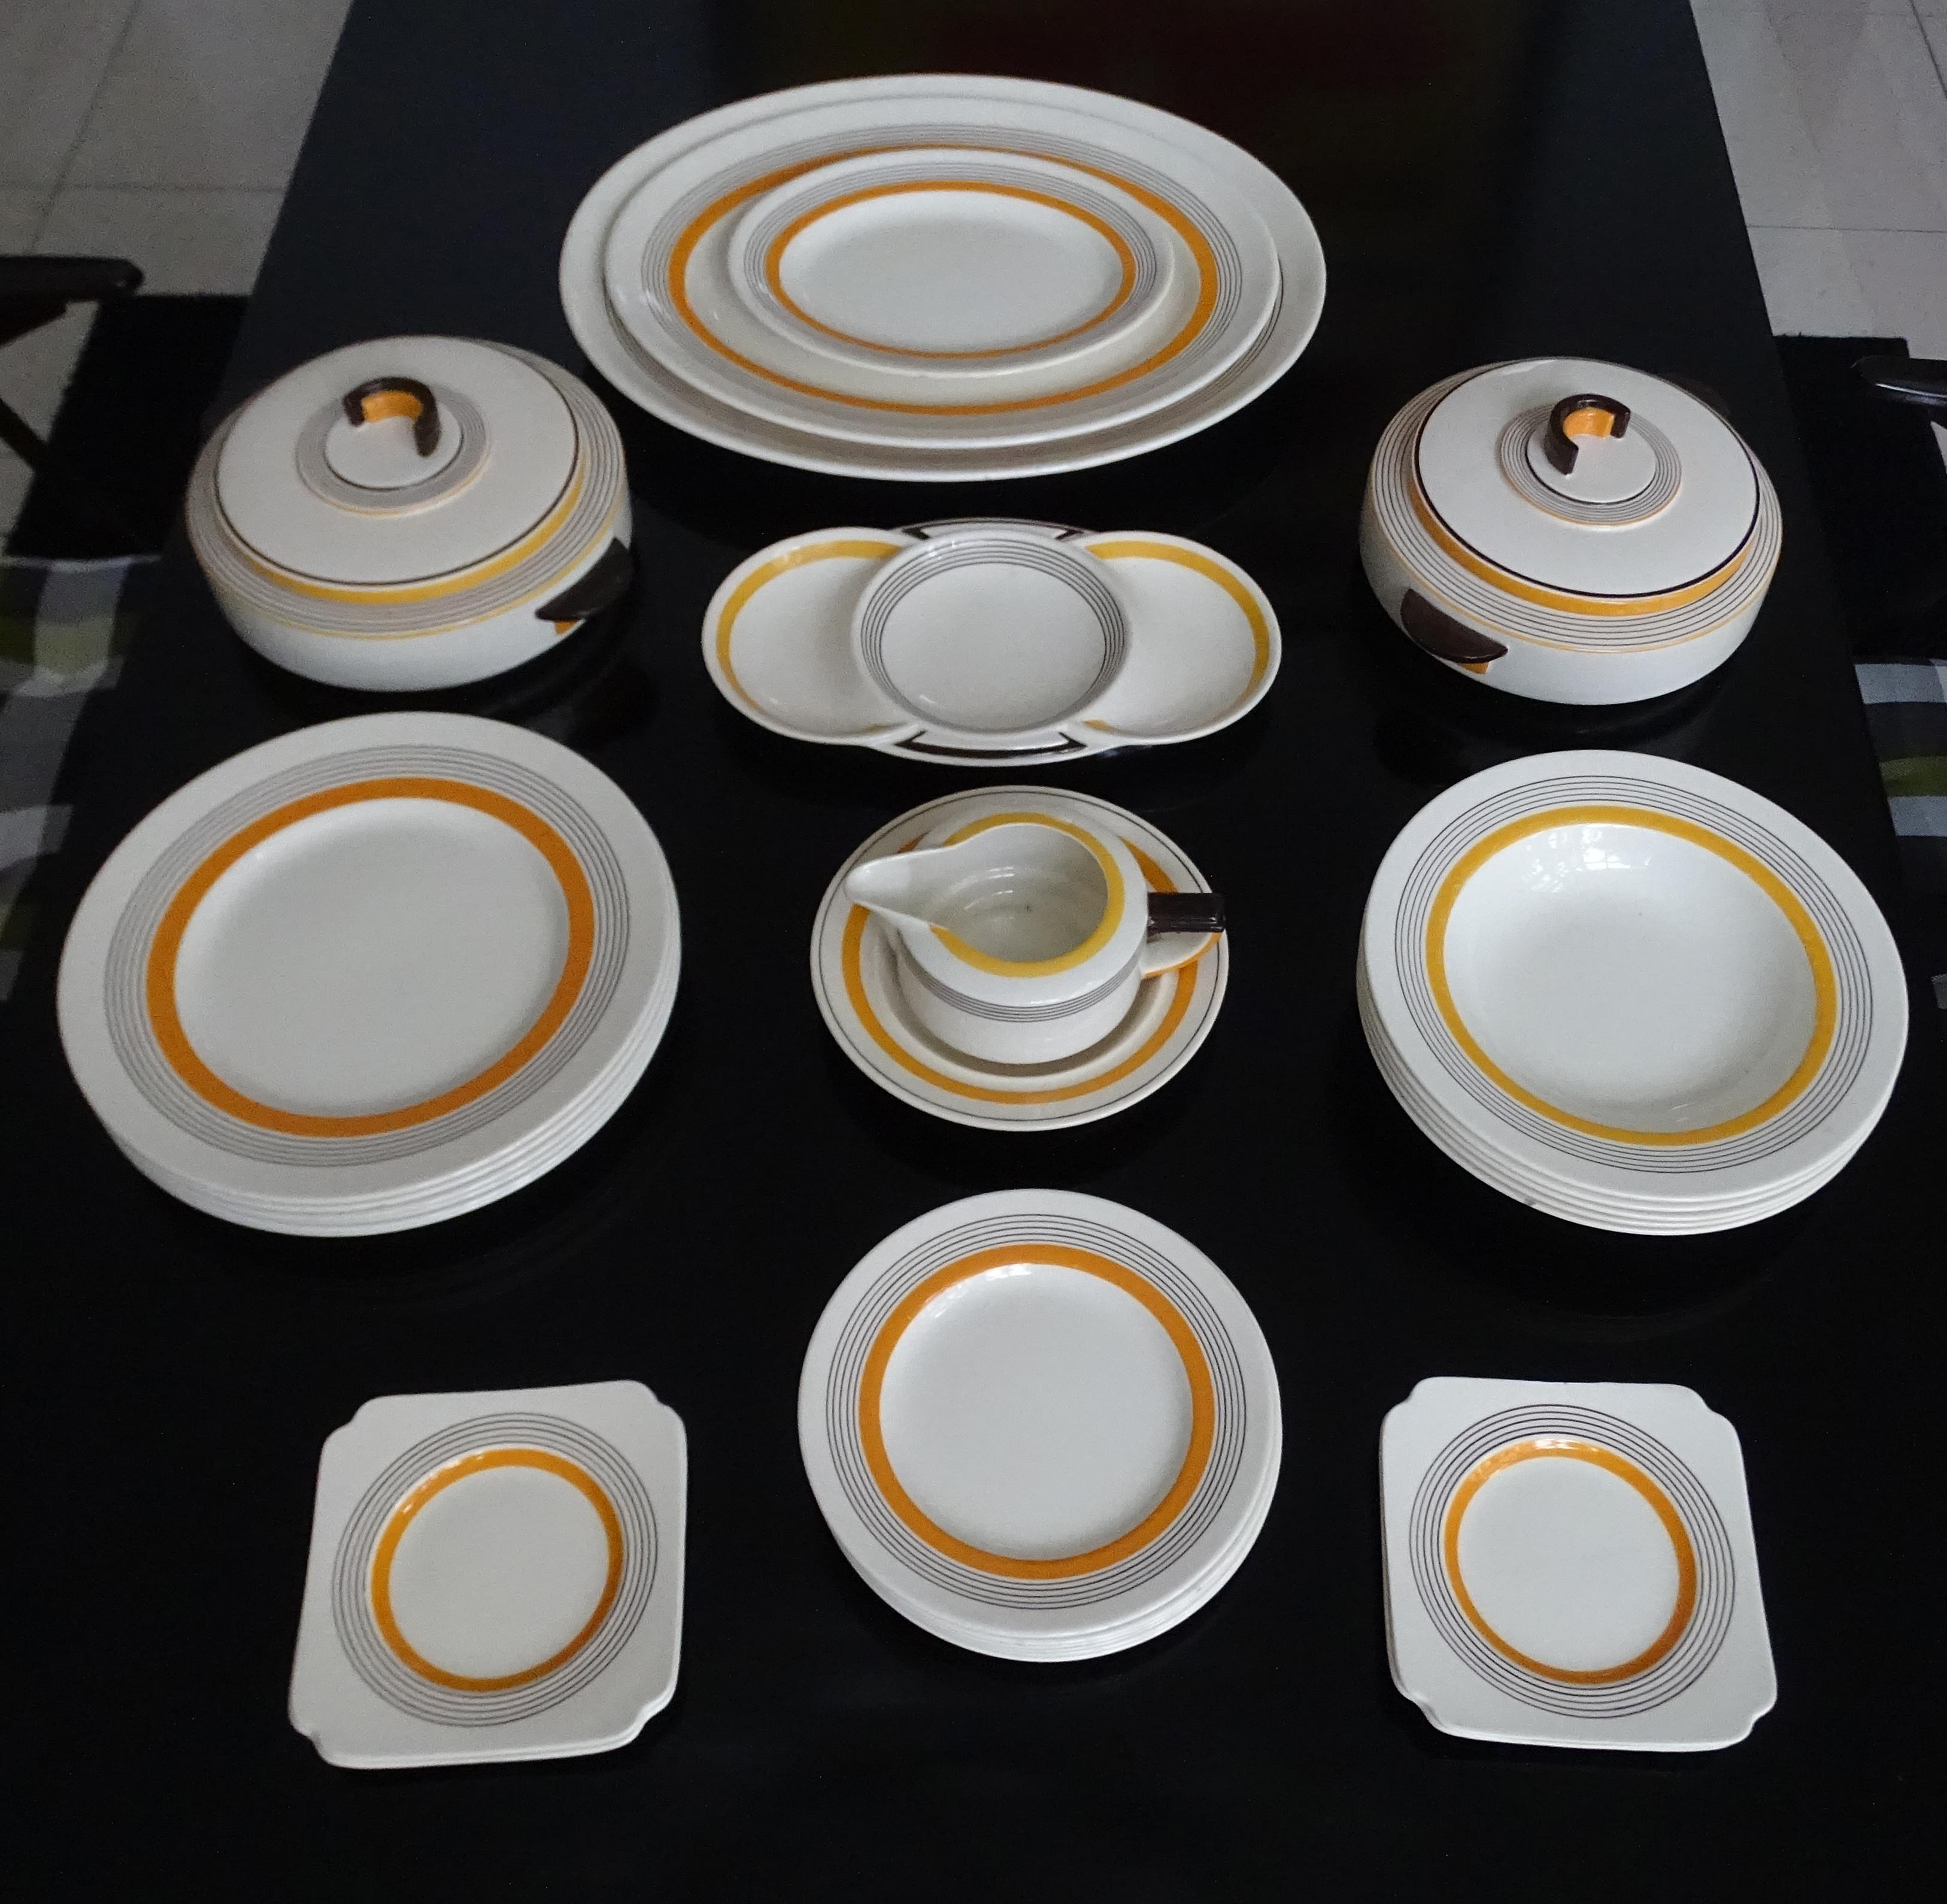 Extremely rare Art Deco dinner set manufactured by Royal Doulton during the 1930s.
The design is called Marquis, an original Art Deco style set from the 1930's which was also dubbed the casino style. It is predominantly white with five concentric